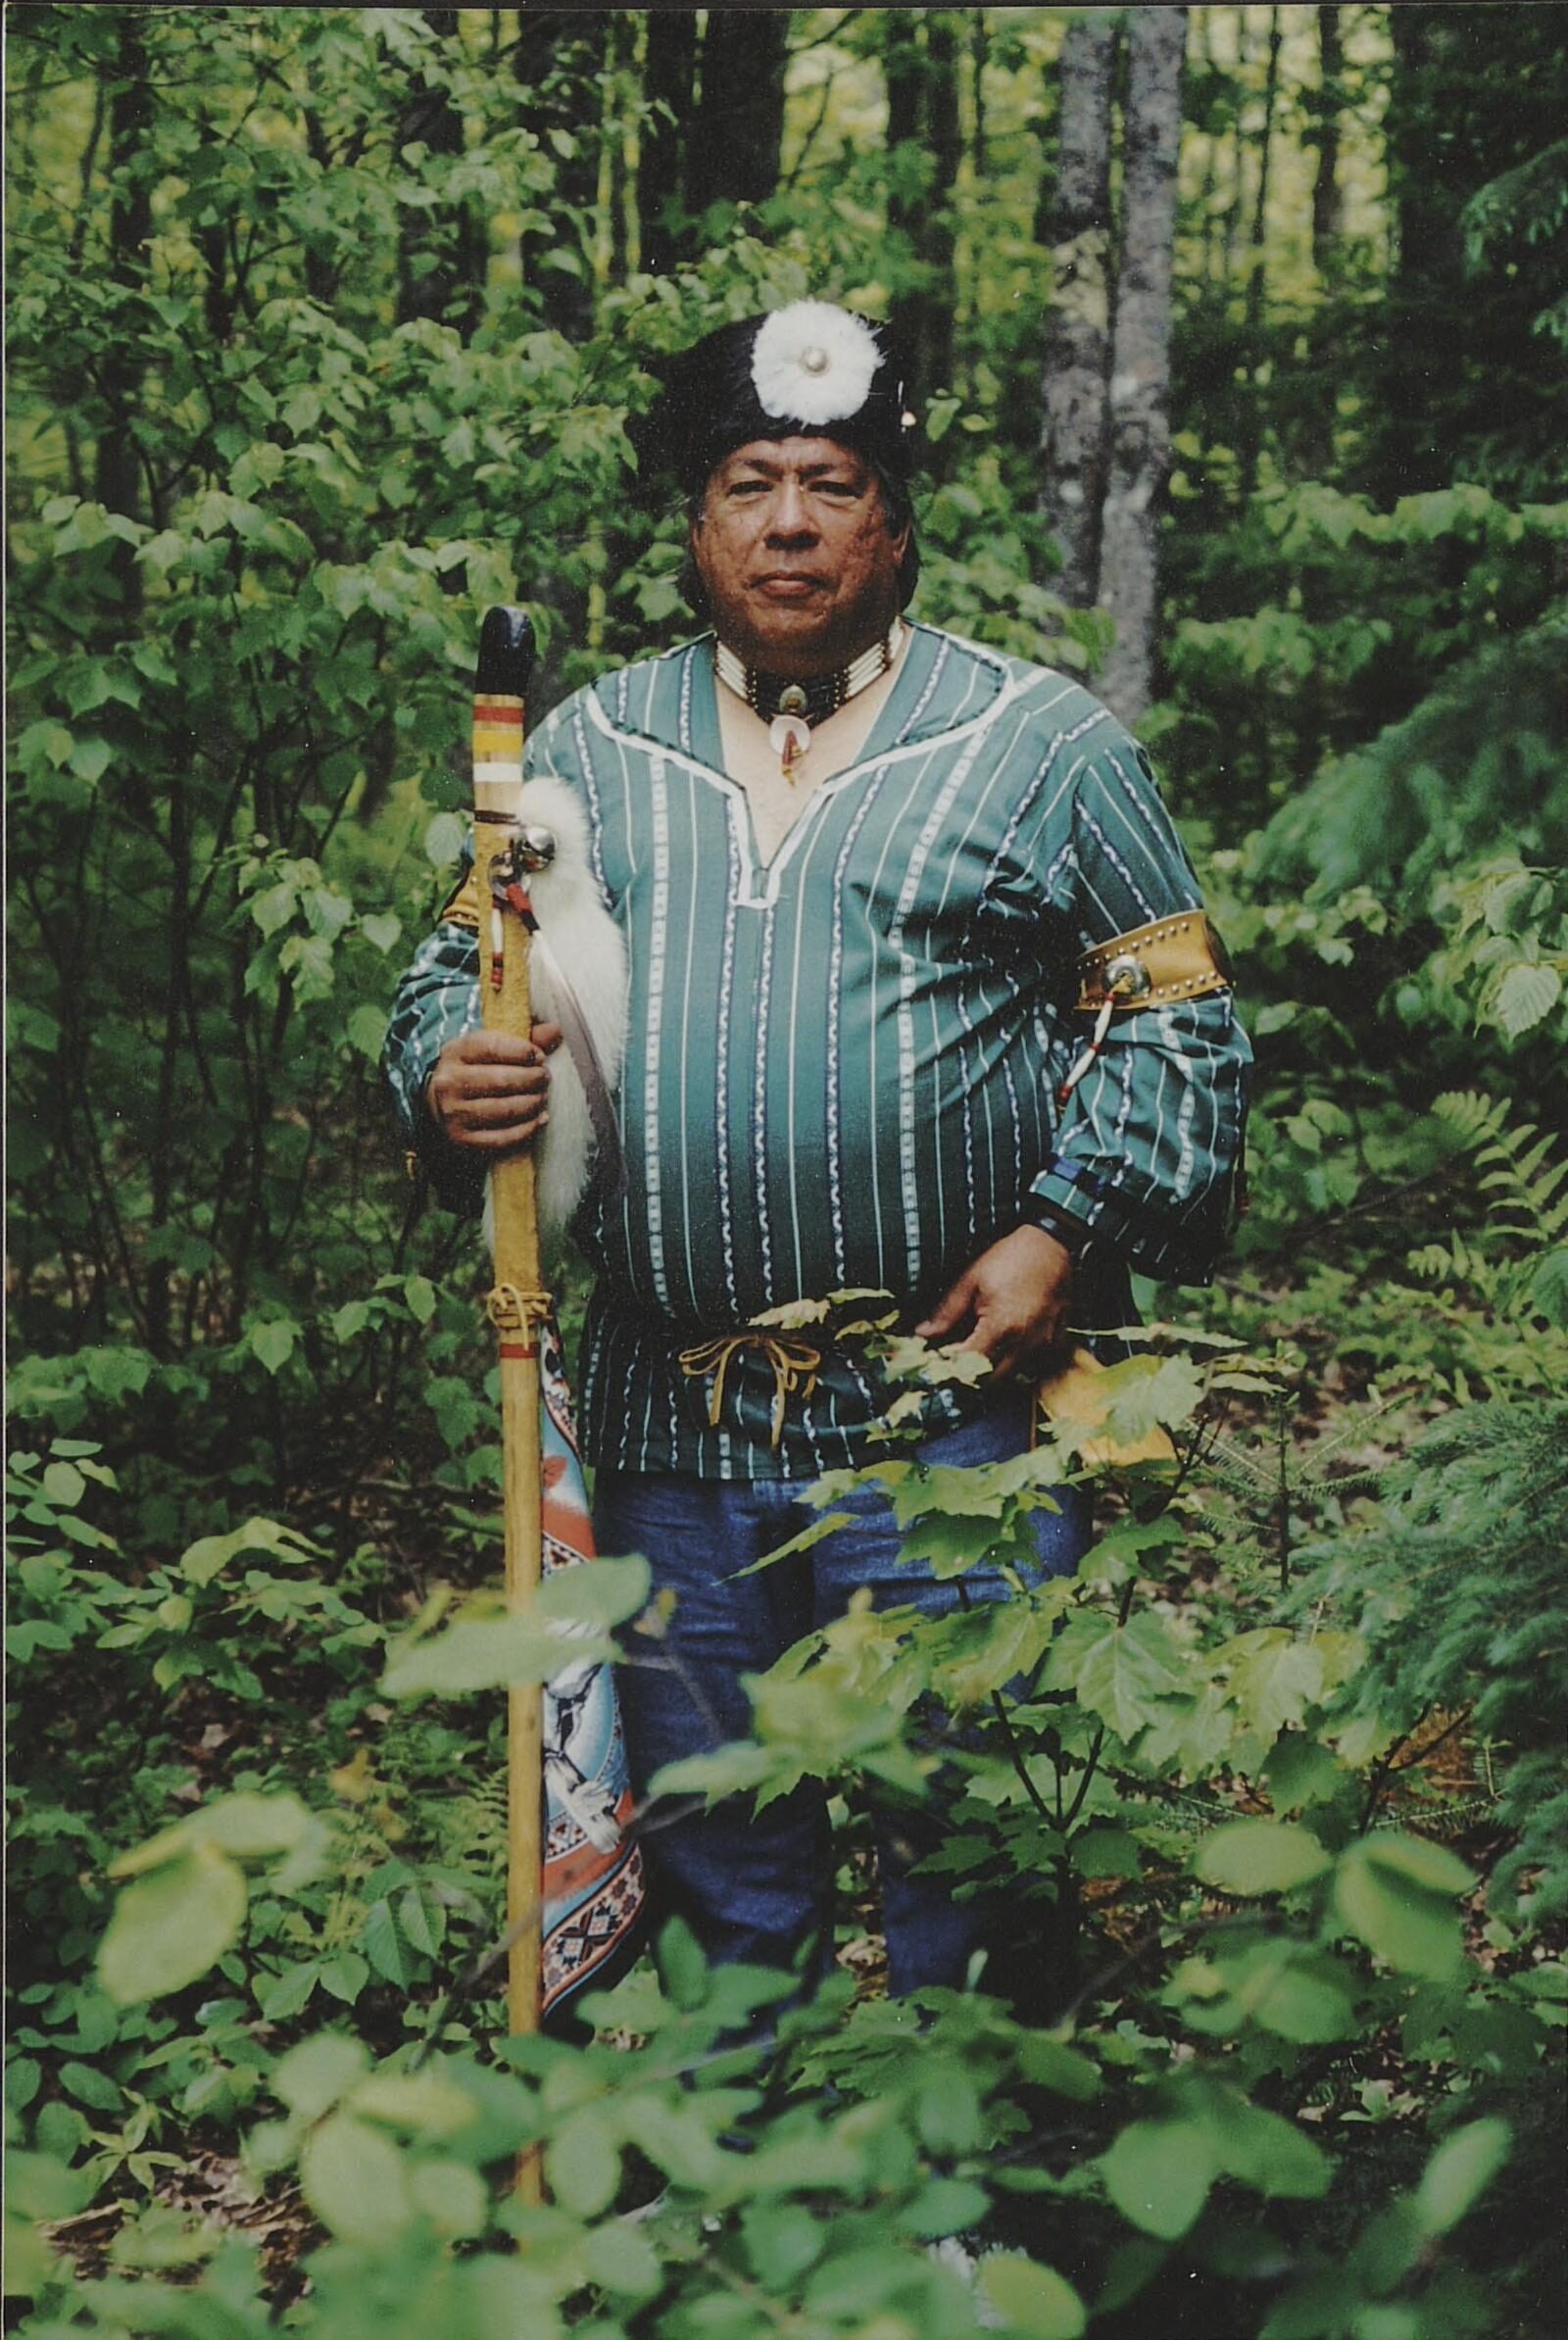 Undated photo of Warren Petosky in native dress standing in a forest.